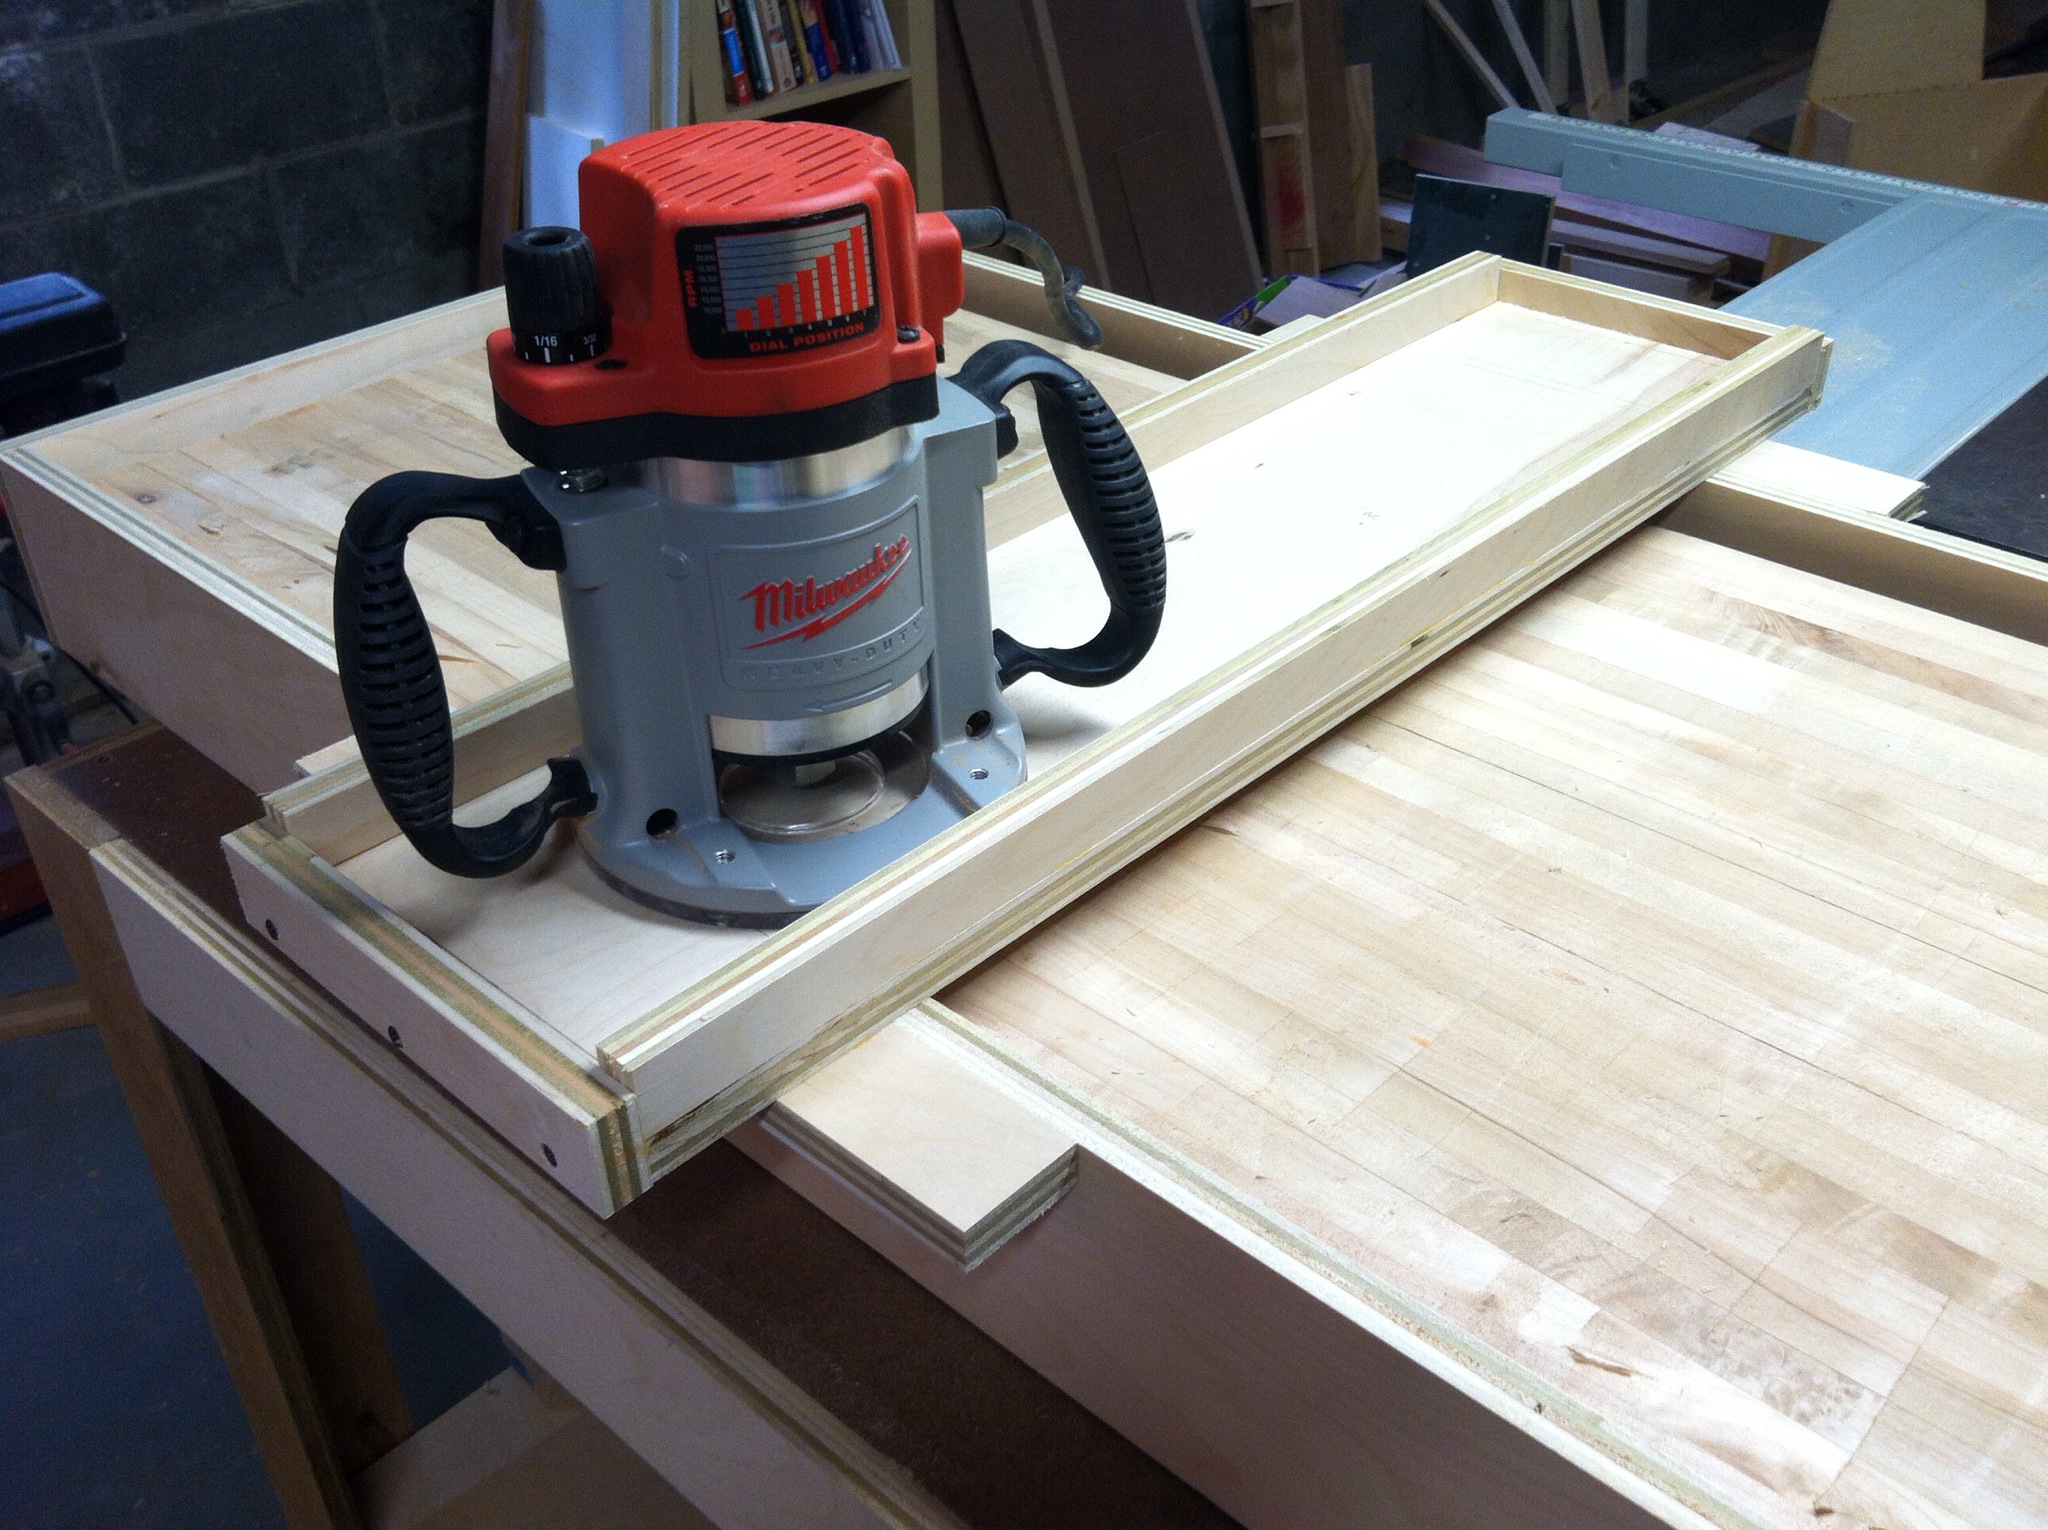 August 2012 - Using my new Milwaukee 3hp router to flatten the benchtop